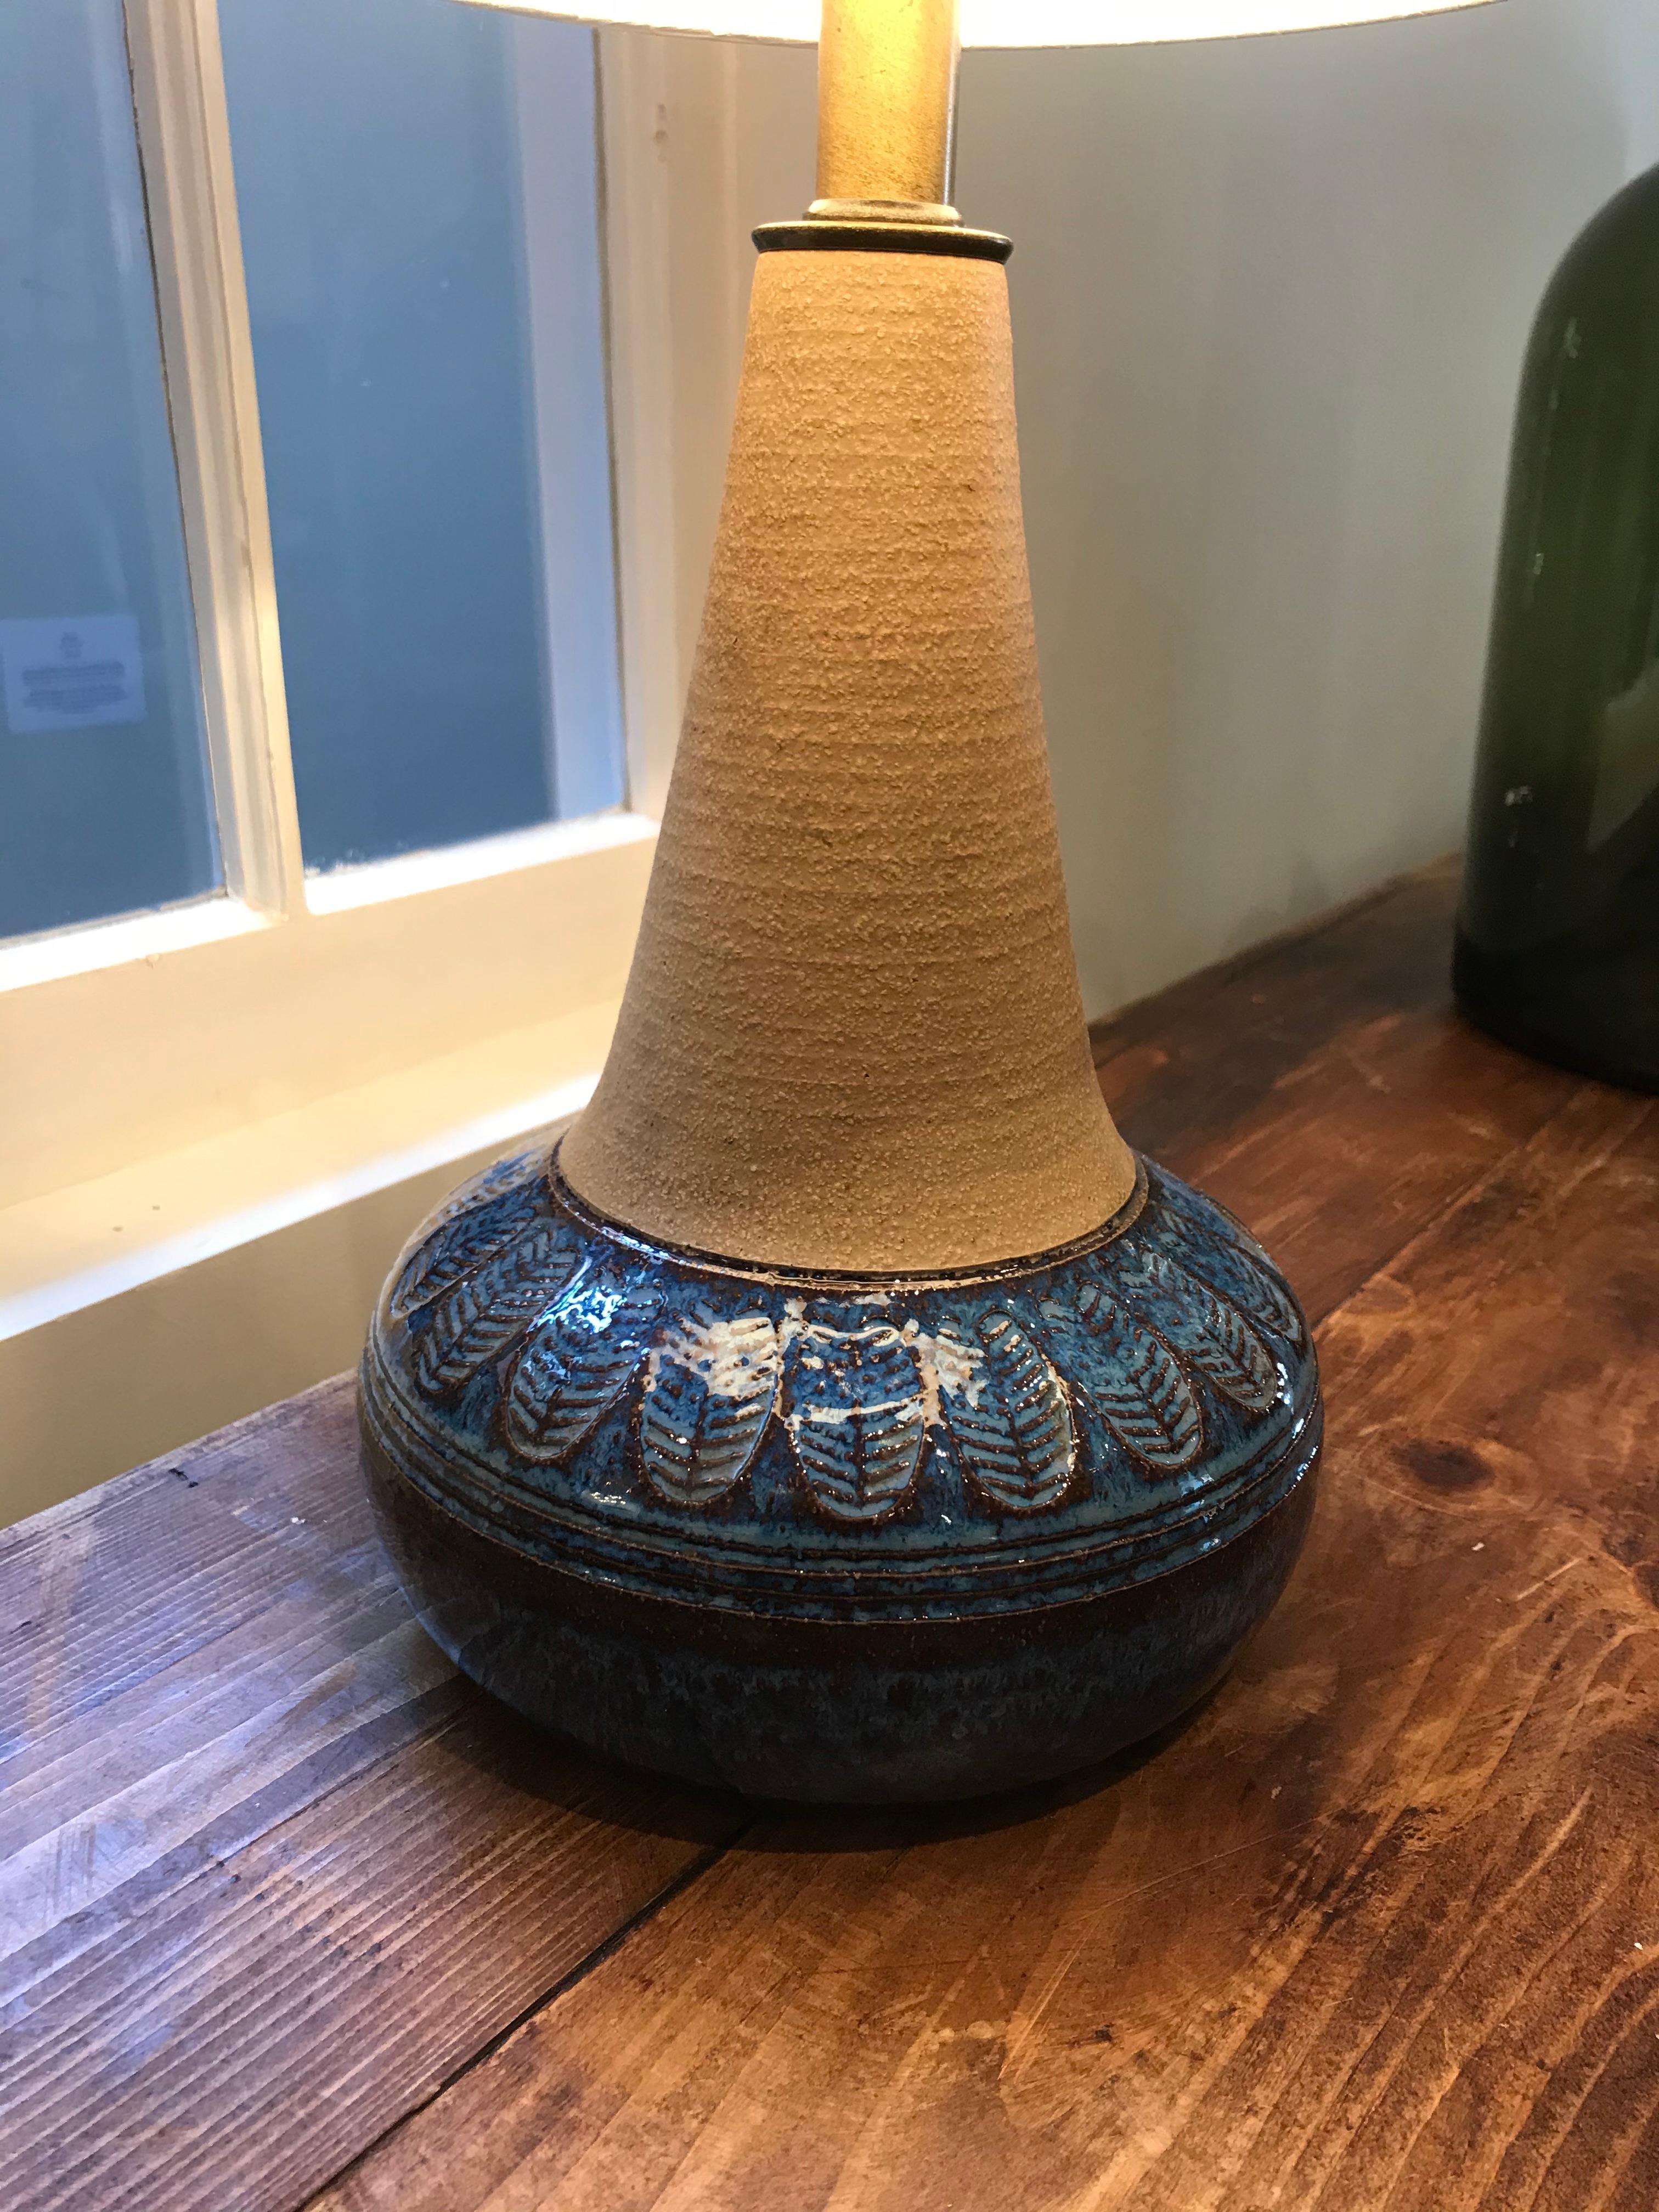 Handmade table lamp with a beautiful blue glaze for its base.
Makers mark on the bottom of base.